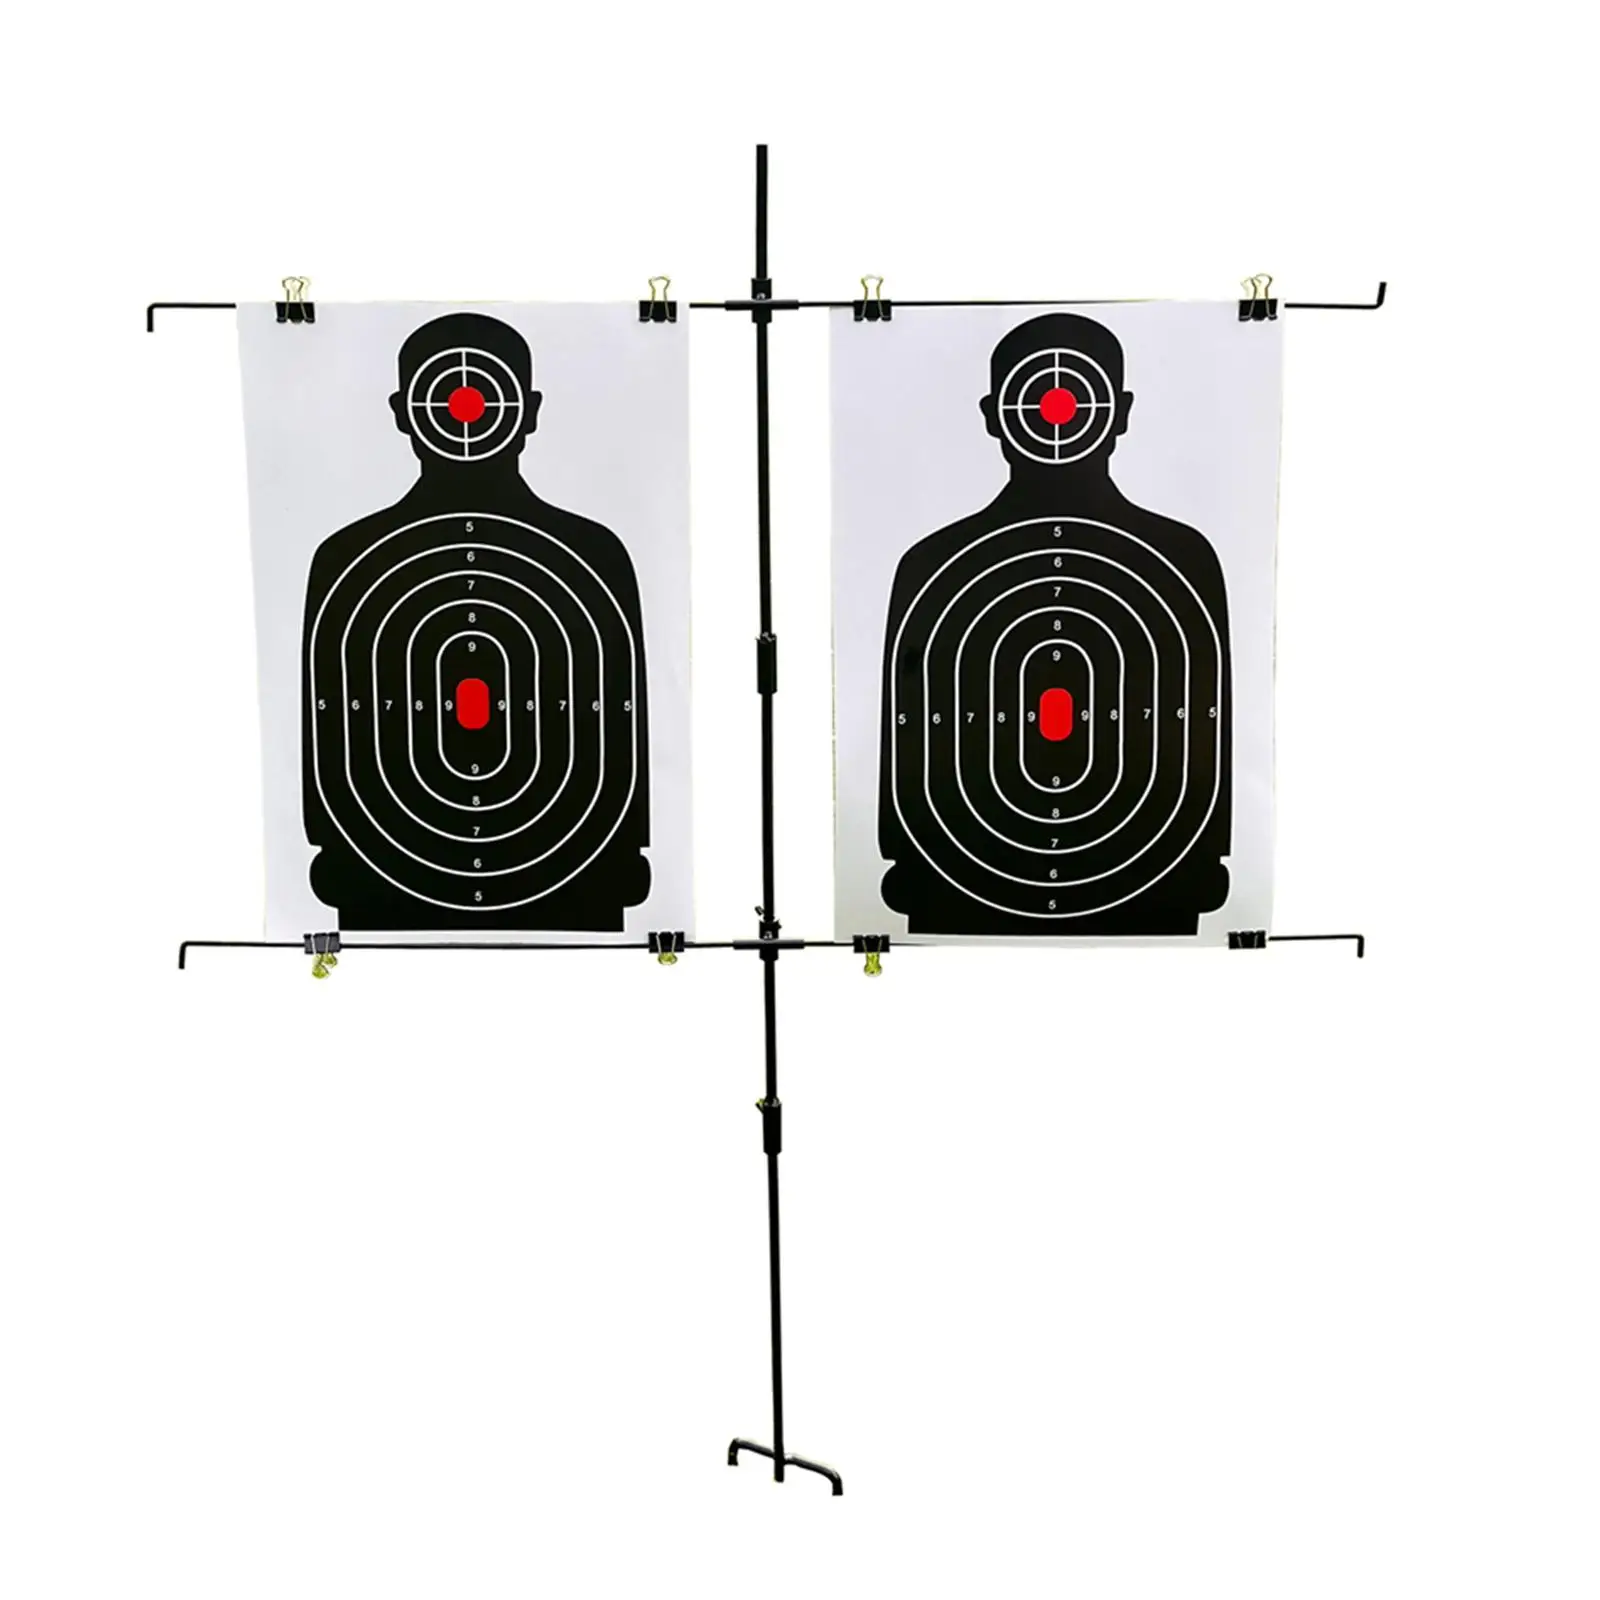 Target Stand Holder Garden Supportories Archery Outdoors Activities Brackets Portable Steel Detachable Paper Target Stand Double